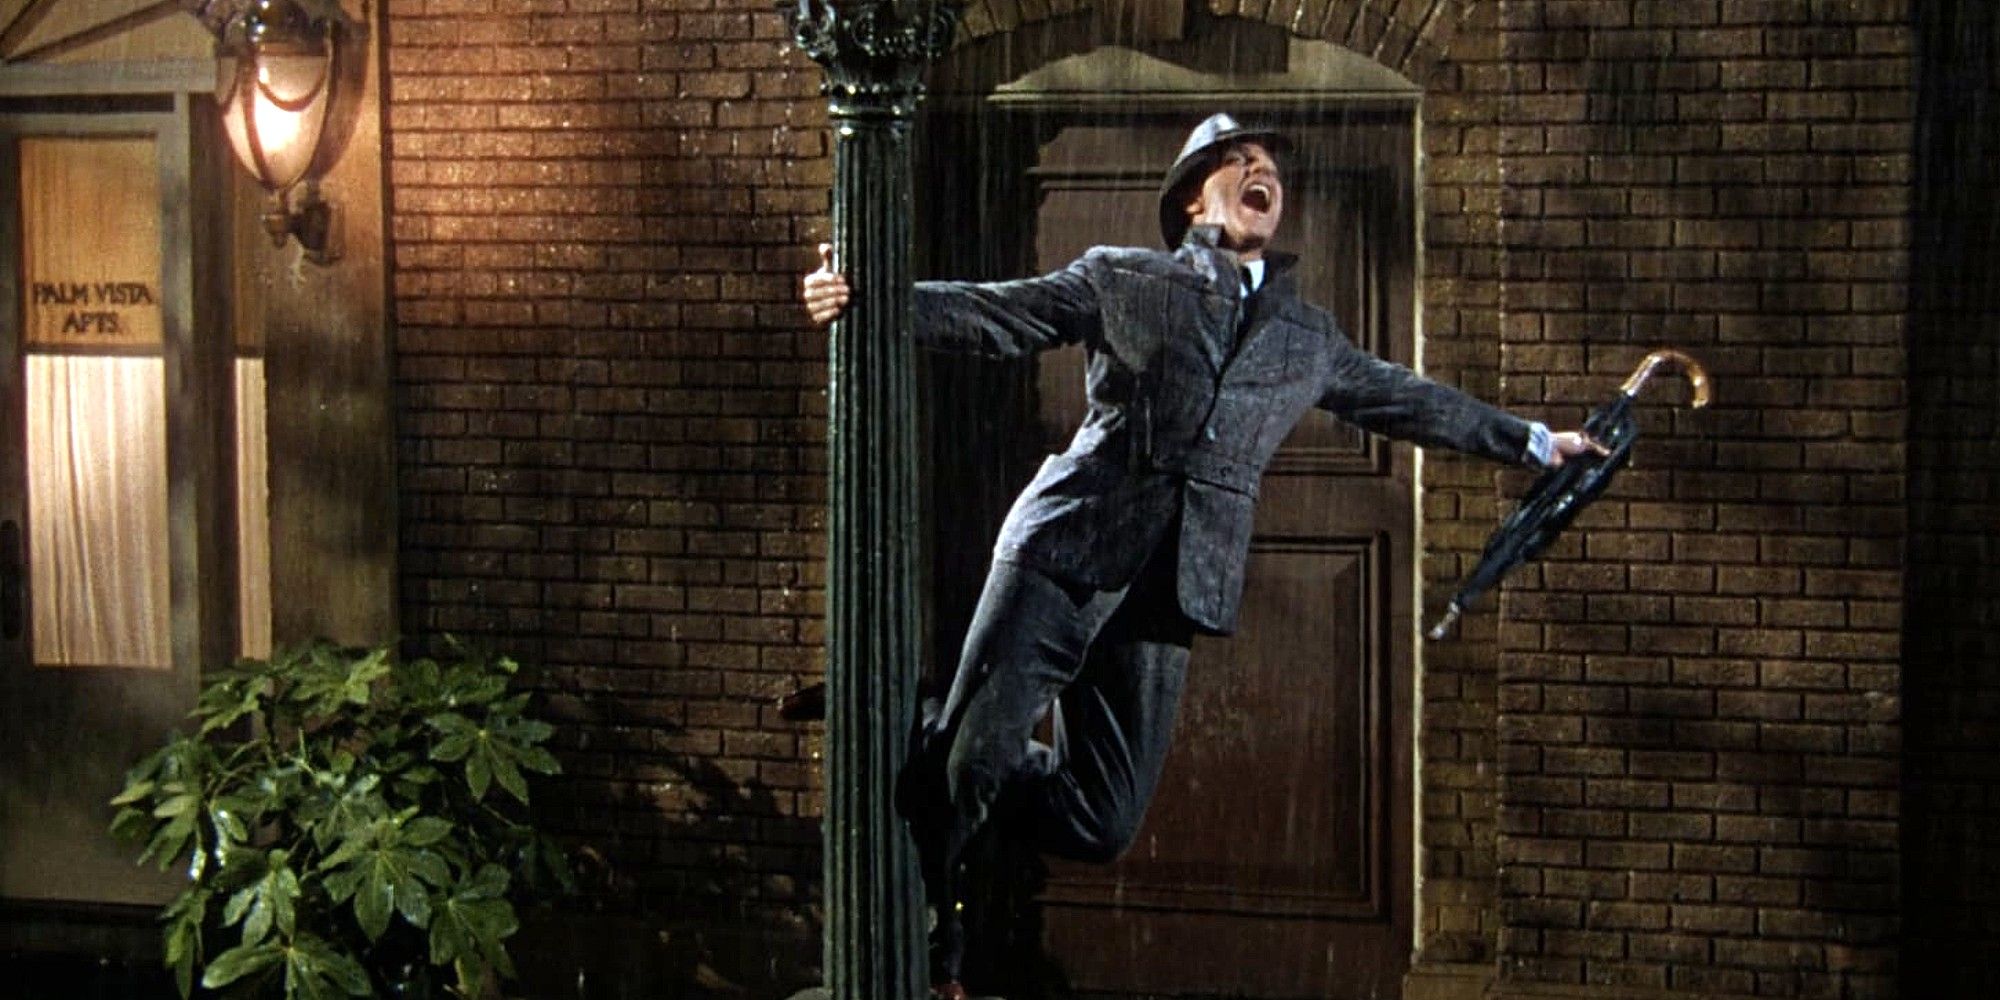 Gene Kelly dancing with an umbrella in Singing in the Rain